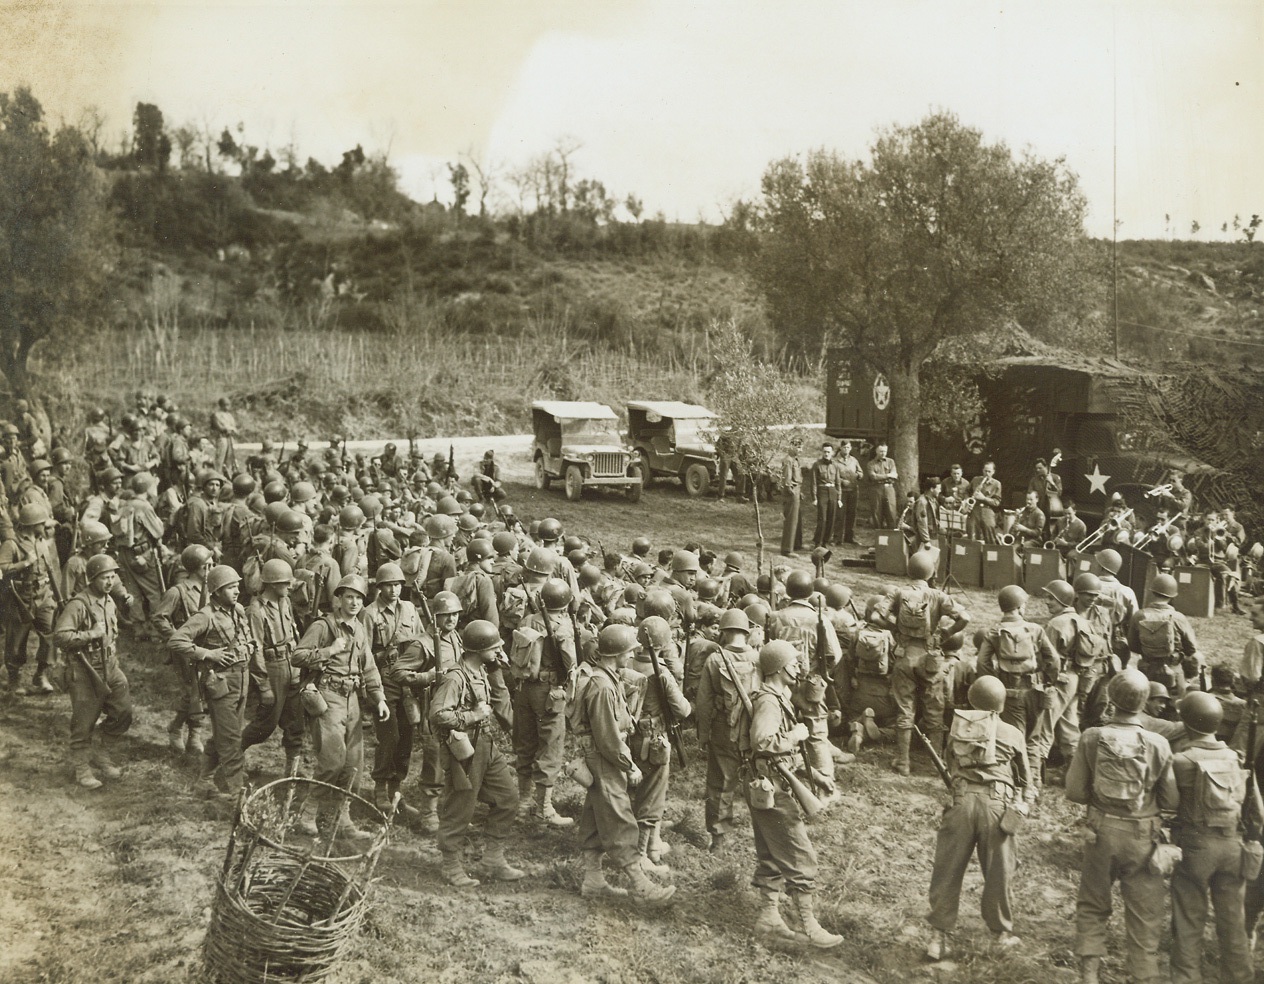 MOBILE RADIO STATION “GETS AROUND”, 4/19/1944. ITALY—War weary men and women of the Allied Fifth Army in Italy are mighty proud of their mobile radio station, officially known as the Fifth Army Mobile American Expeditionary Station, which gets it [sic] music and its “big time” programs to them wherever they are—in the front lines, or in rest camps. The hard working crew that moves the station’s ten-unit “circus caravan” of jeeps and trailers, and 2-1/2 ton trucks to various points in the combat area making sure that every group is reached at least once a day, have the moving operation down to a fine point. They can take the station down, move it 50 miles (which is the range of the transmitter), and set it up again, all within less than two hours. Here, a Fifth Army band set up before the station “somewhere in Italy,” furnishes a swing concert for Combat Engineers of the 337th Battalion, who call a halt to listen. At the same time, the music is broadcast by the station.Credit: Acme photo by Sherman Montrose for the War Picture Pool;